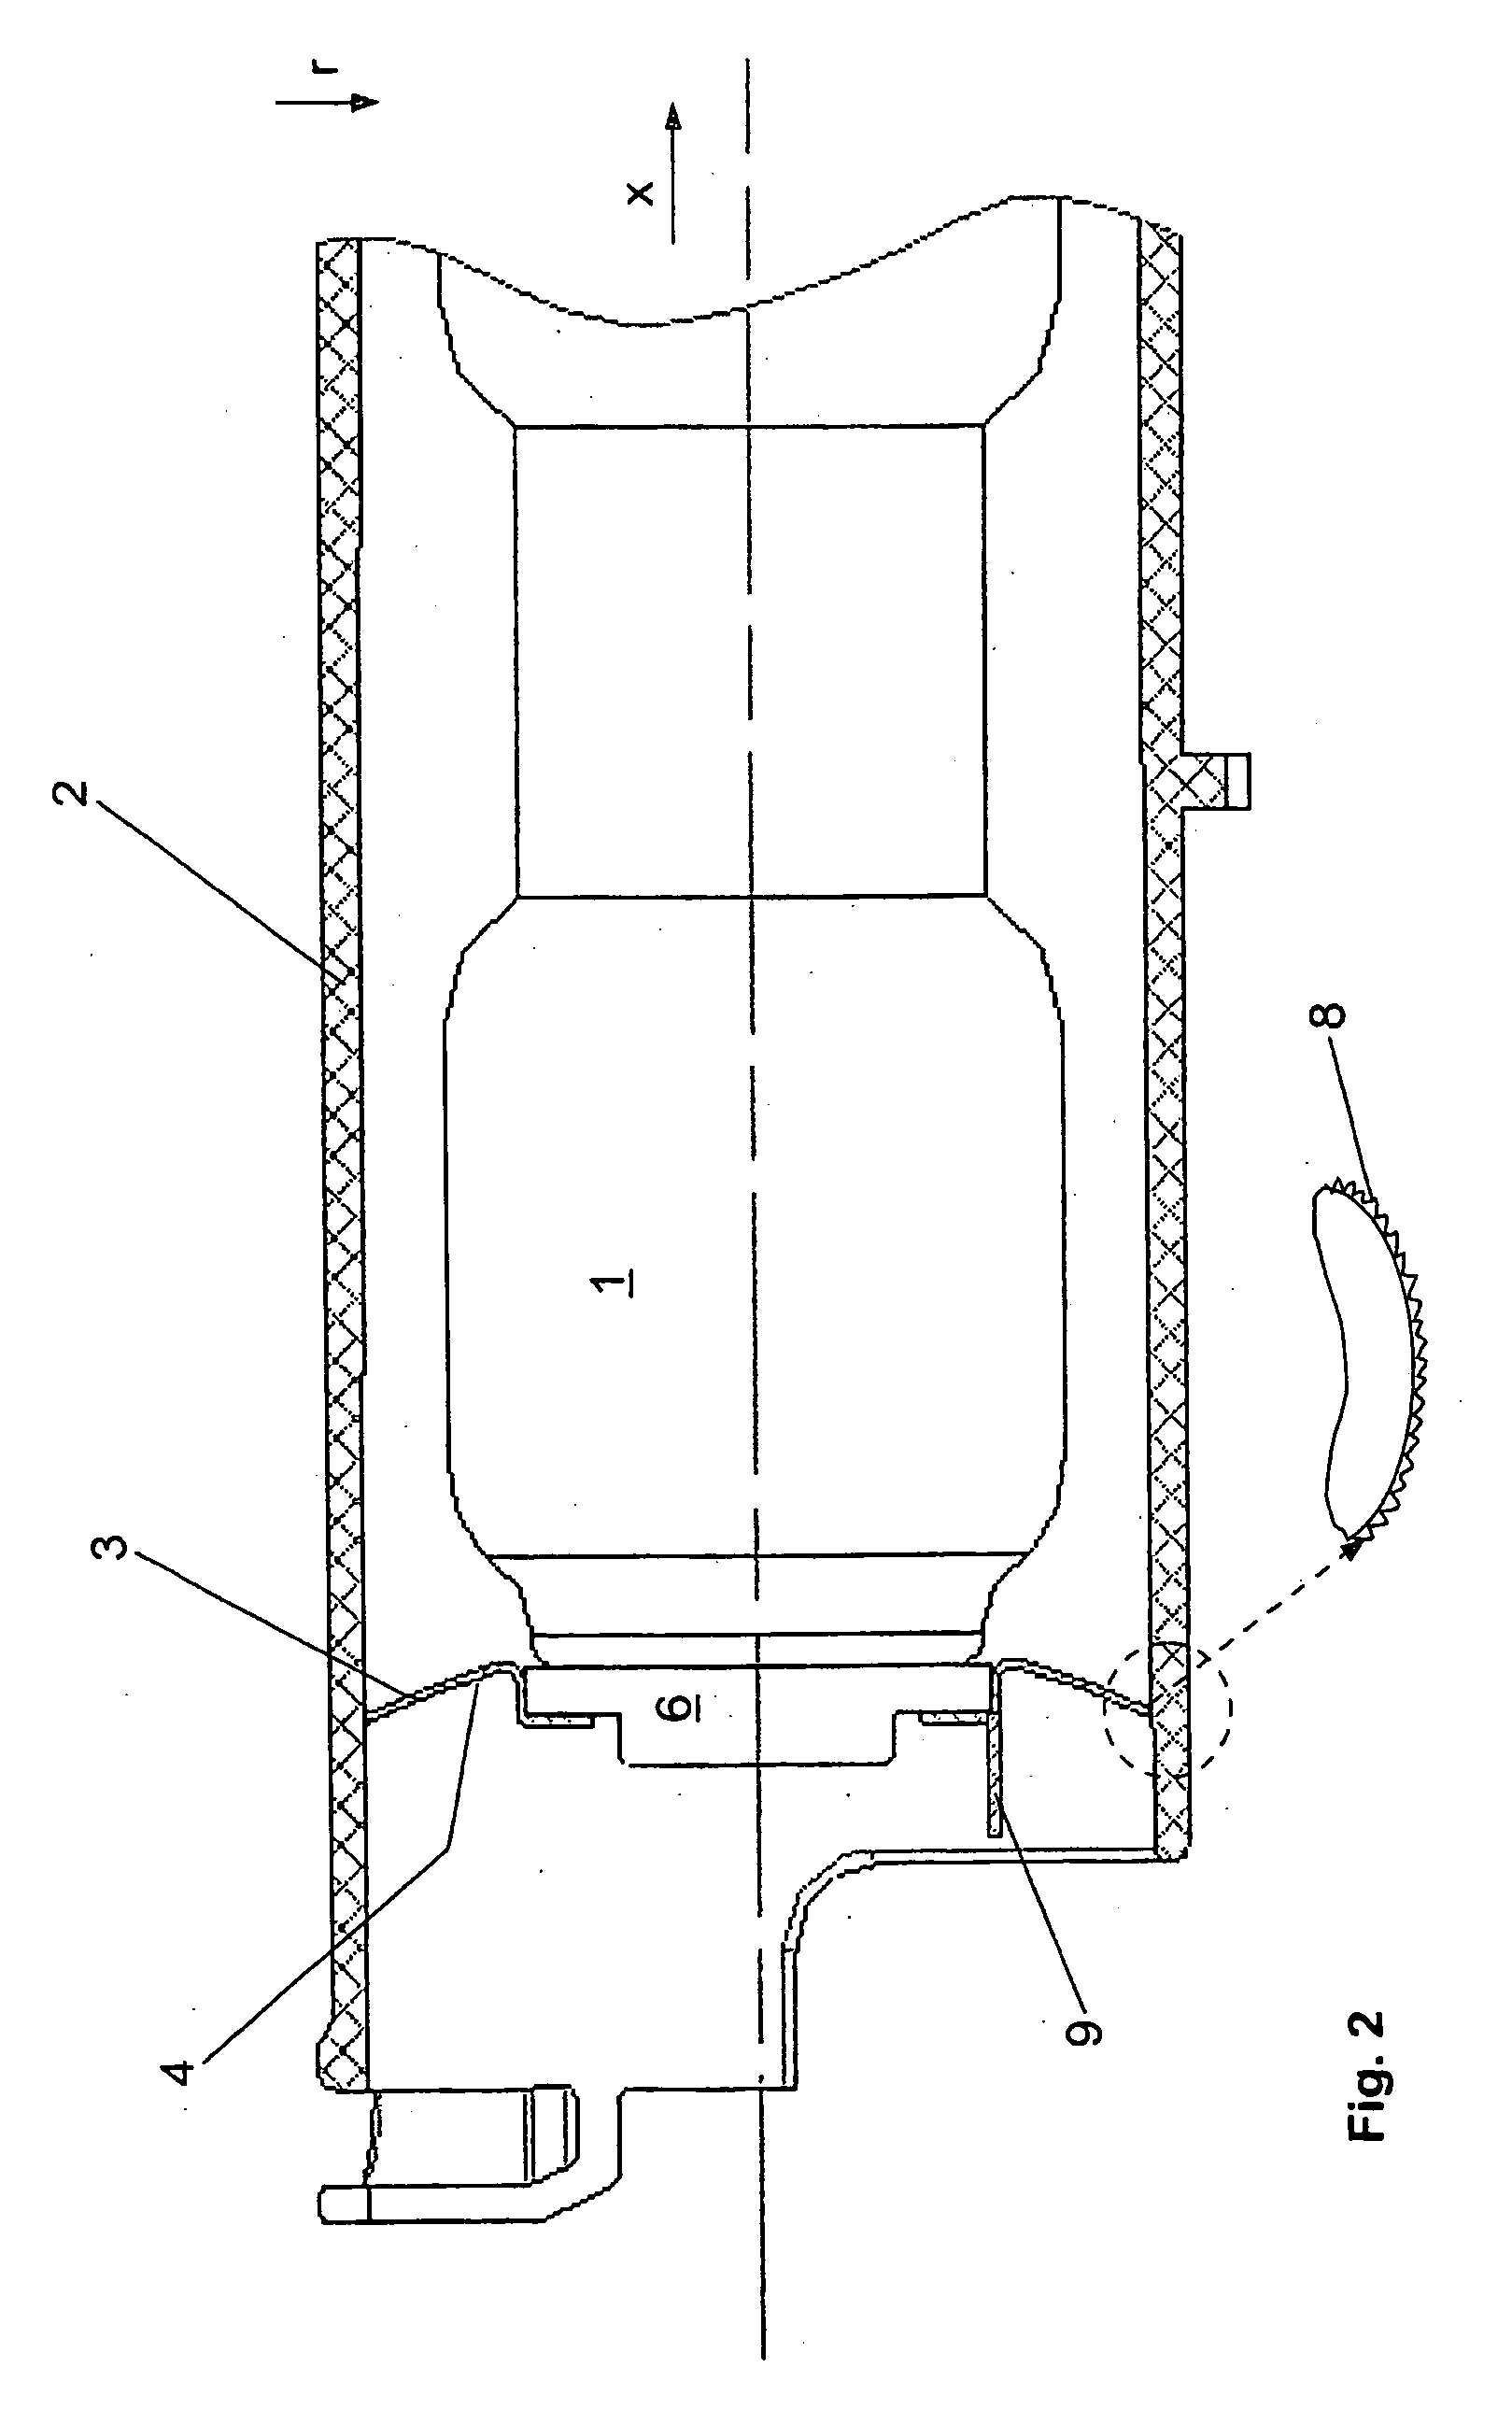 Arrangement For Fixing the Gas Generator of an Air Bag Unit